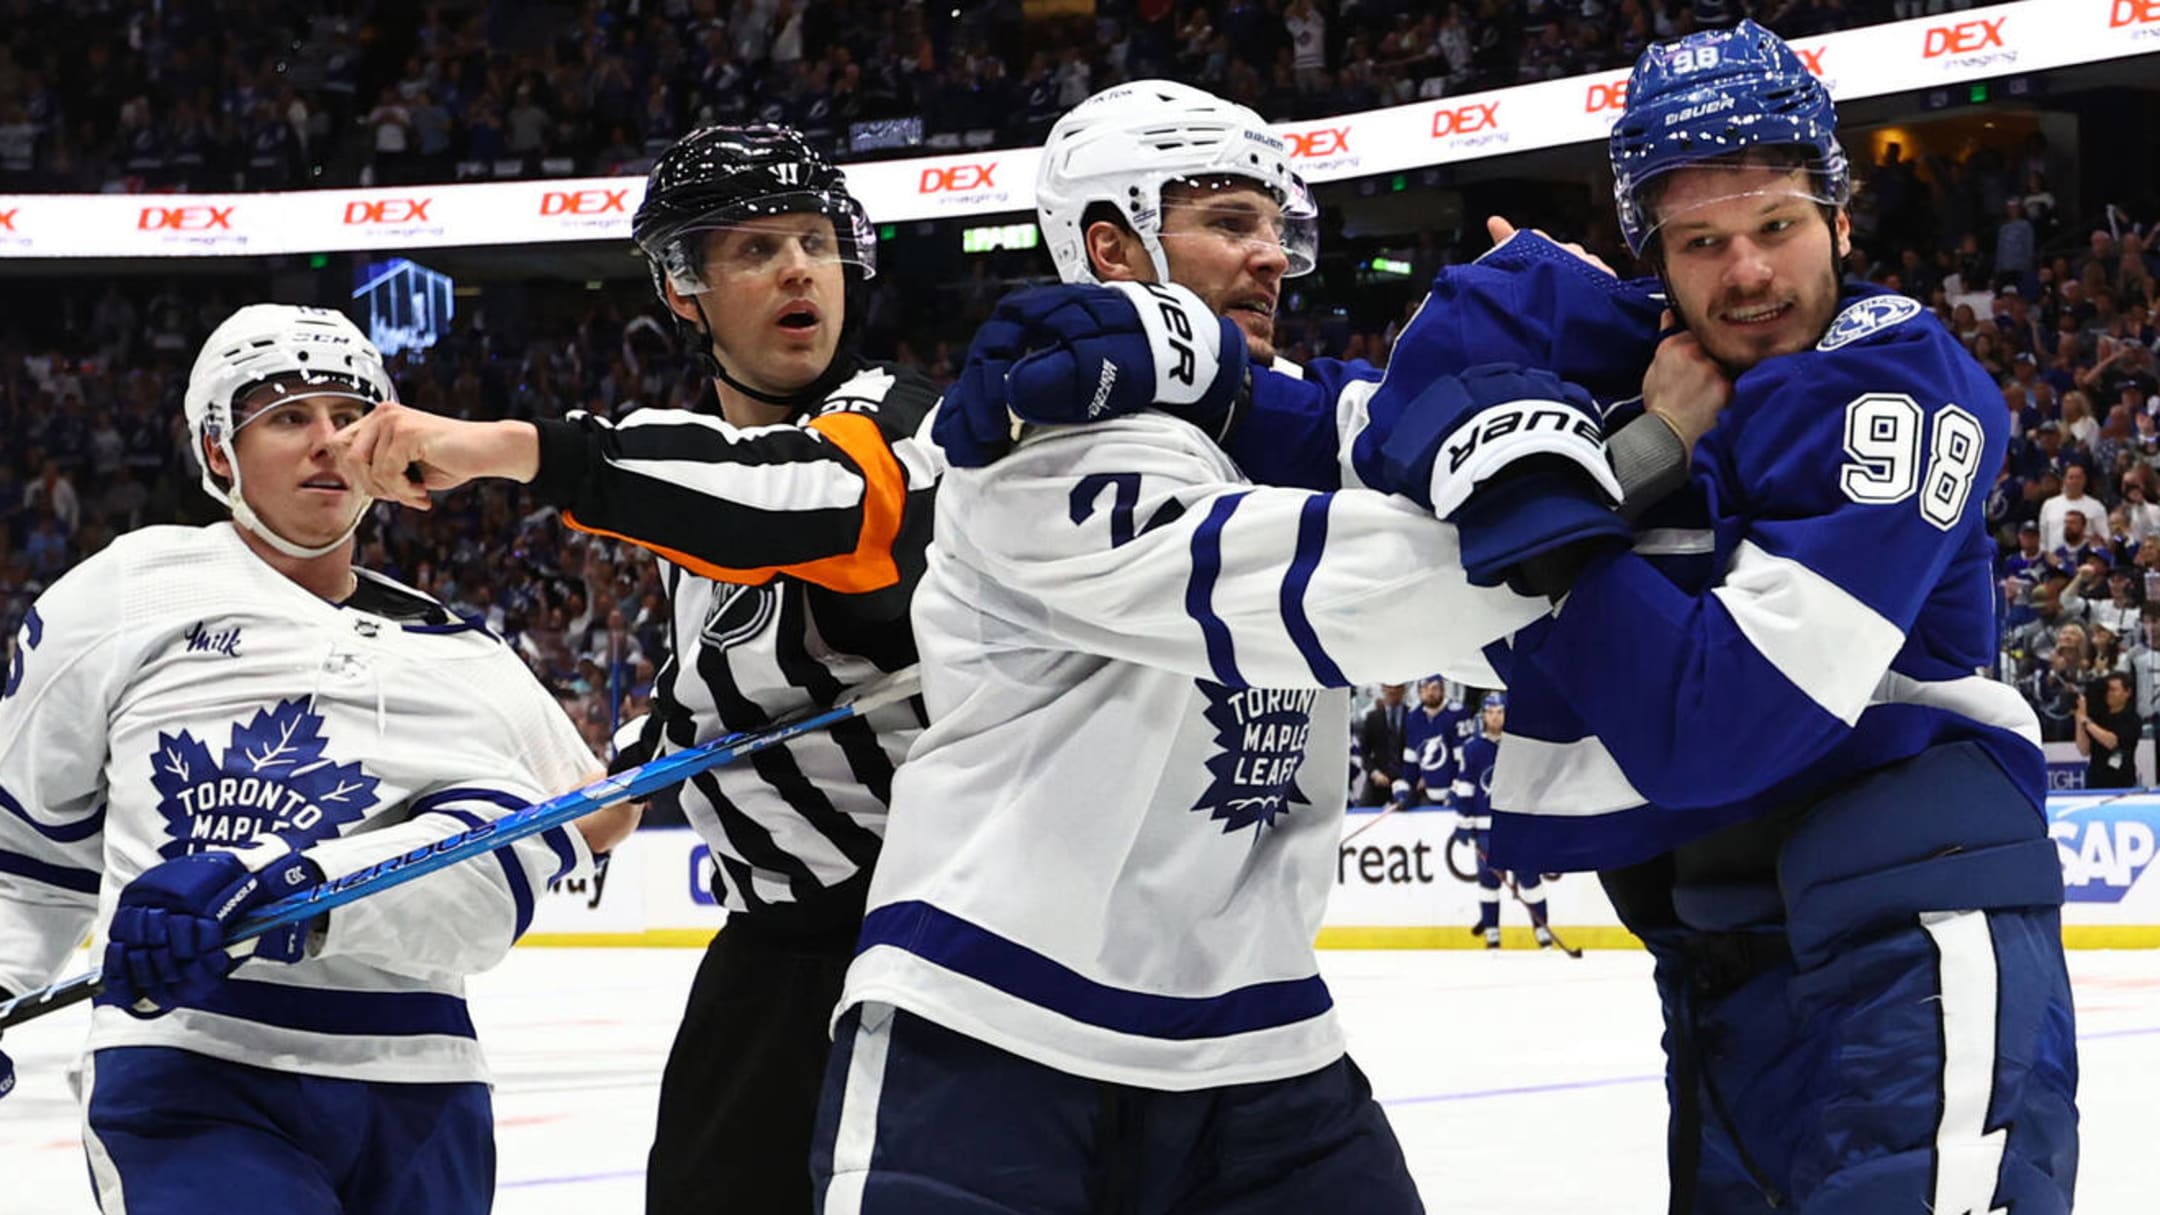 Auston Matthews suspended: Maple Leafs star benched by NHL for 2 games